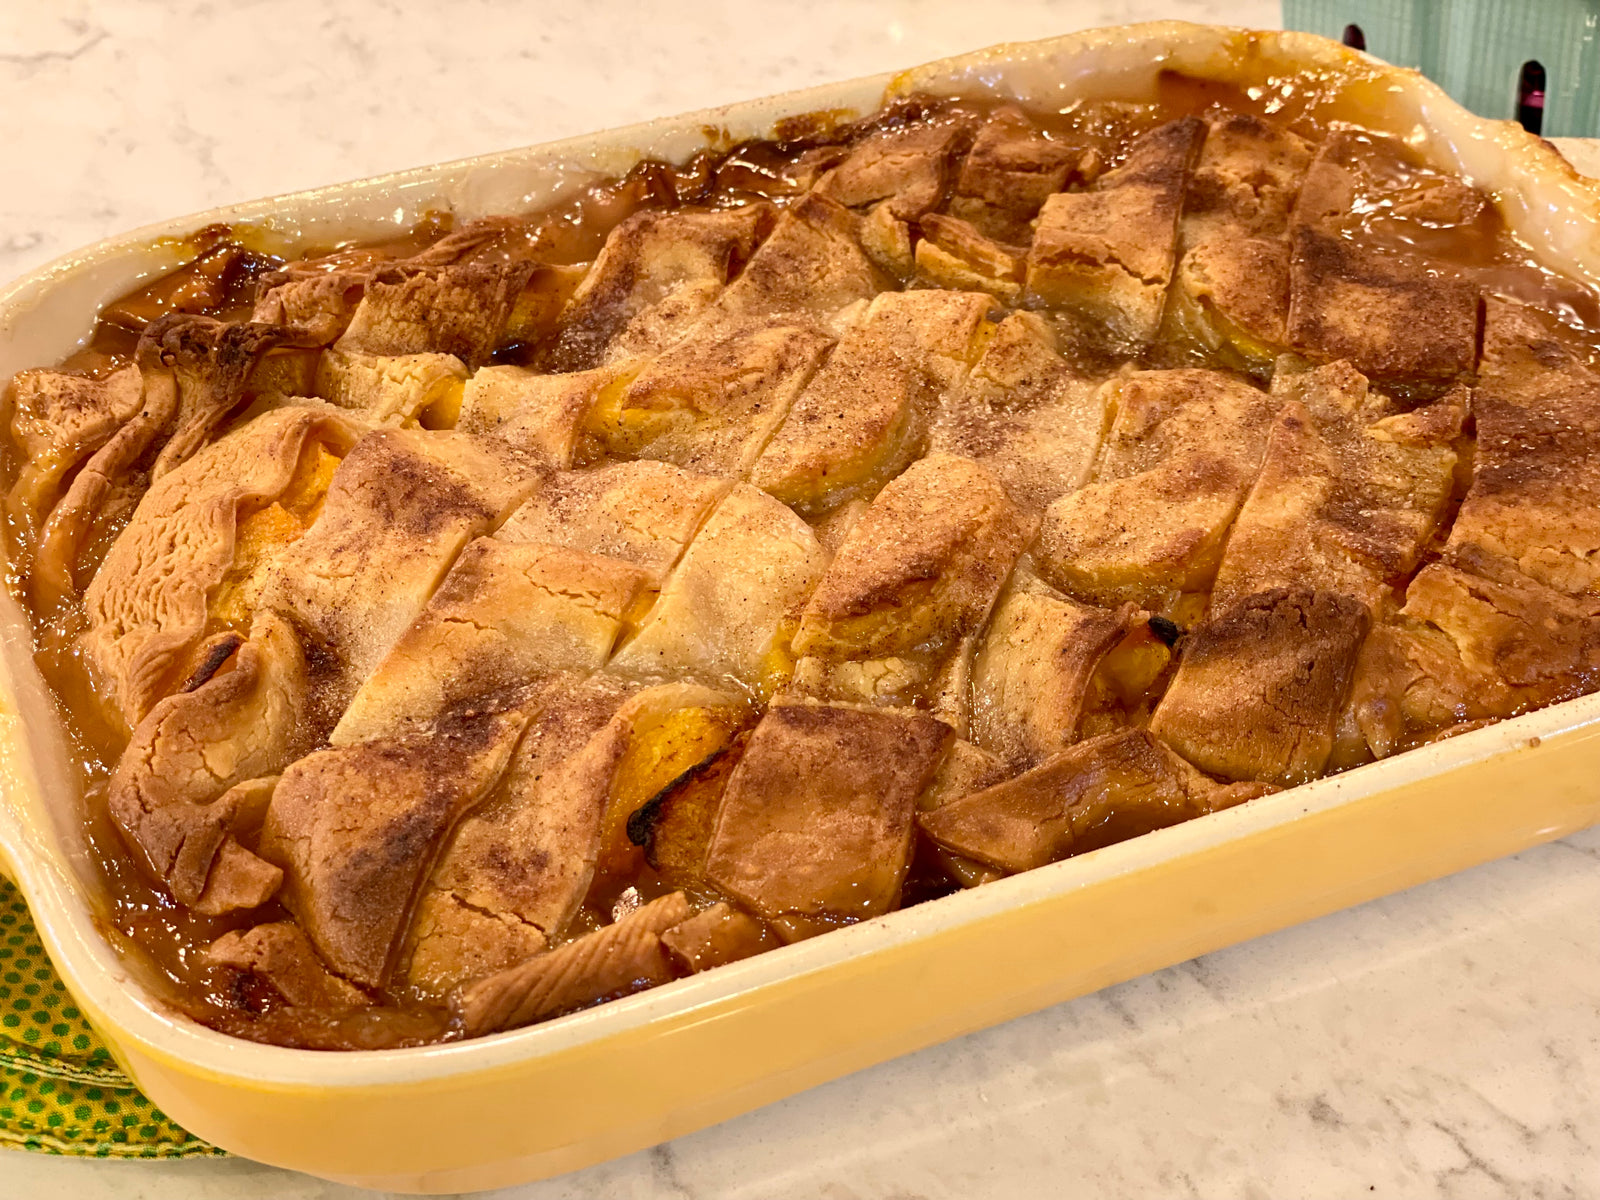 Peach Cobbler Baked in a Yellow Dish